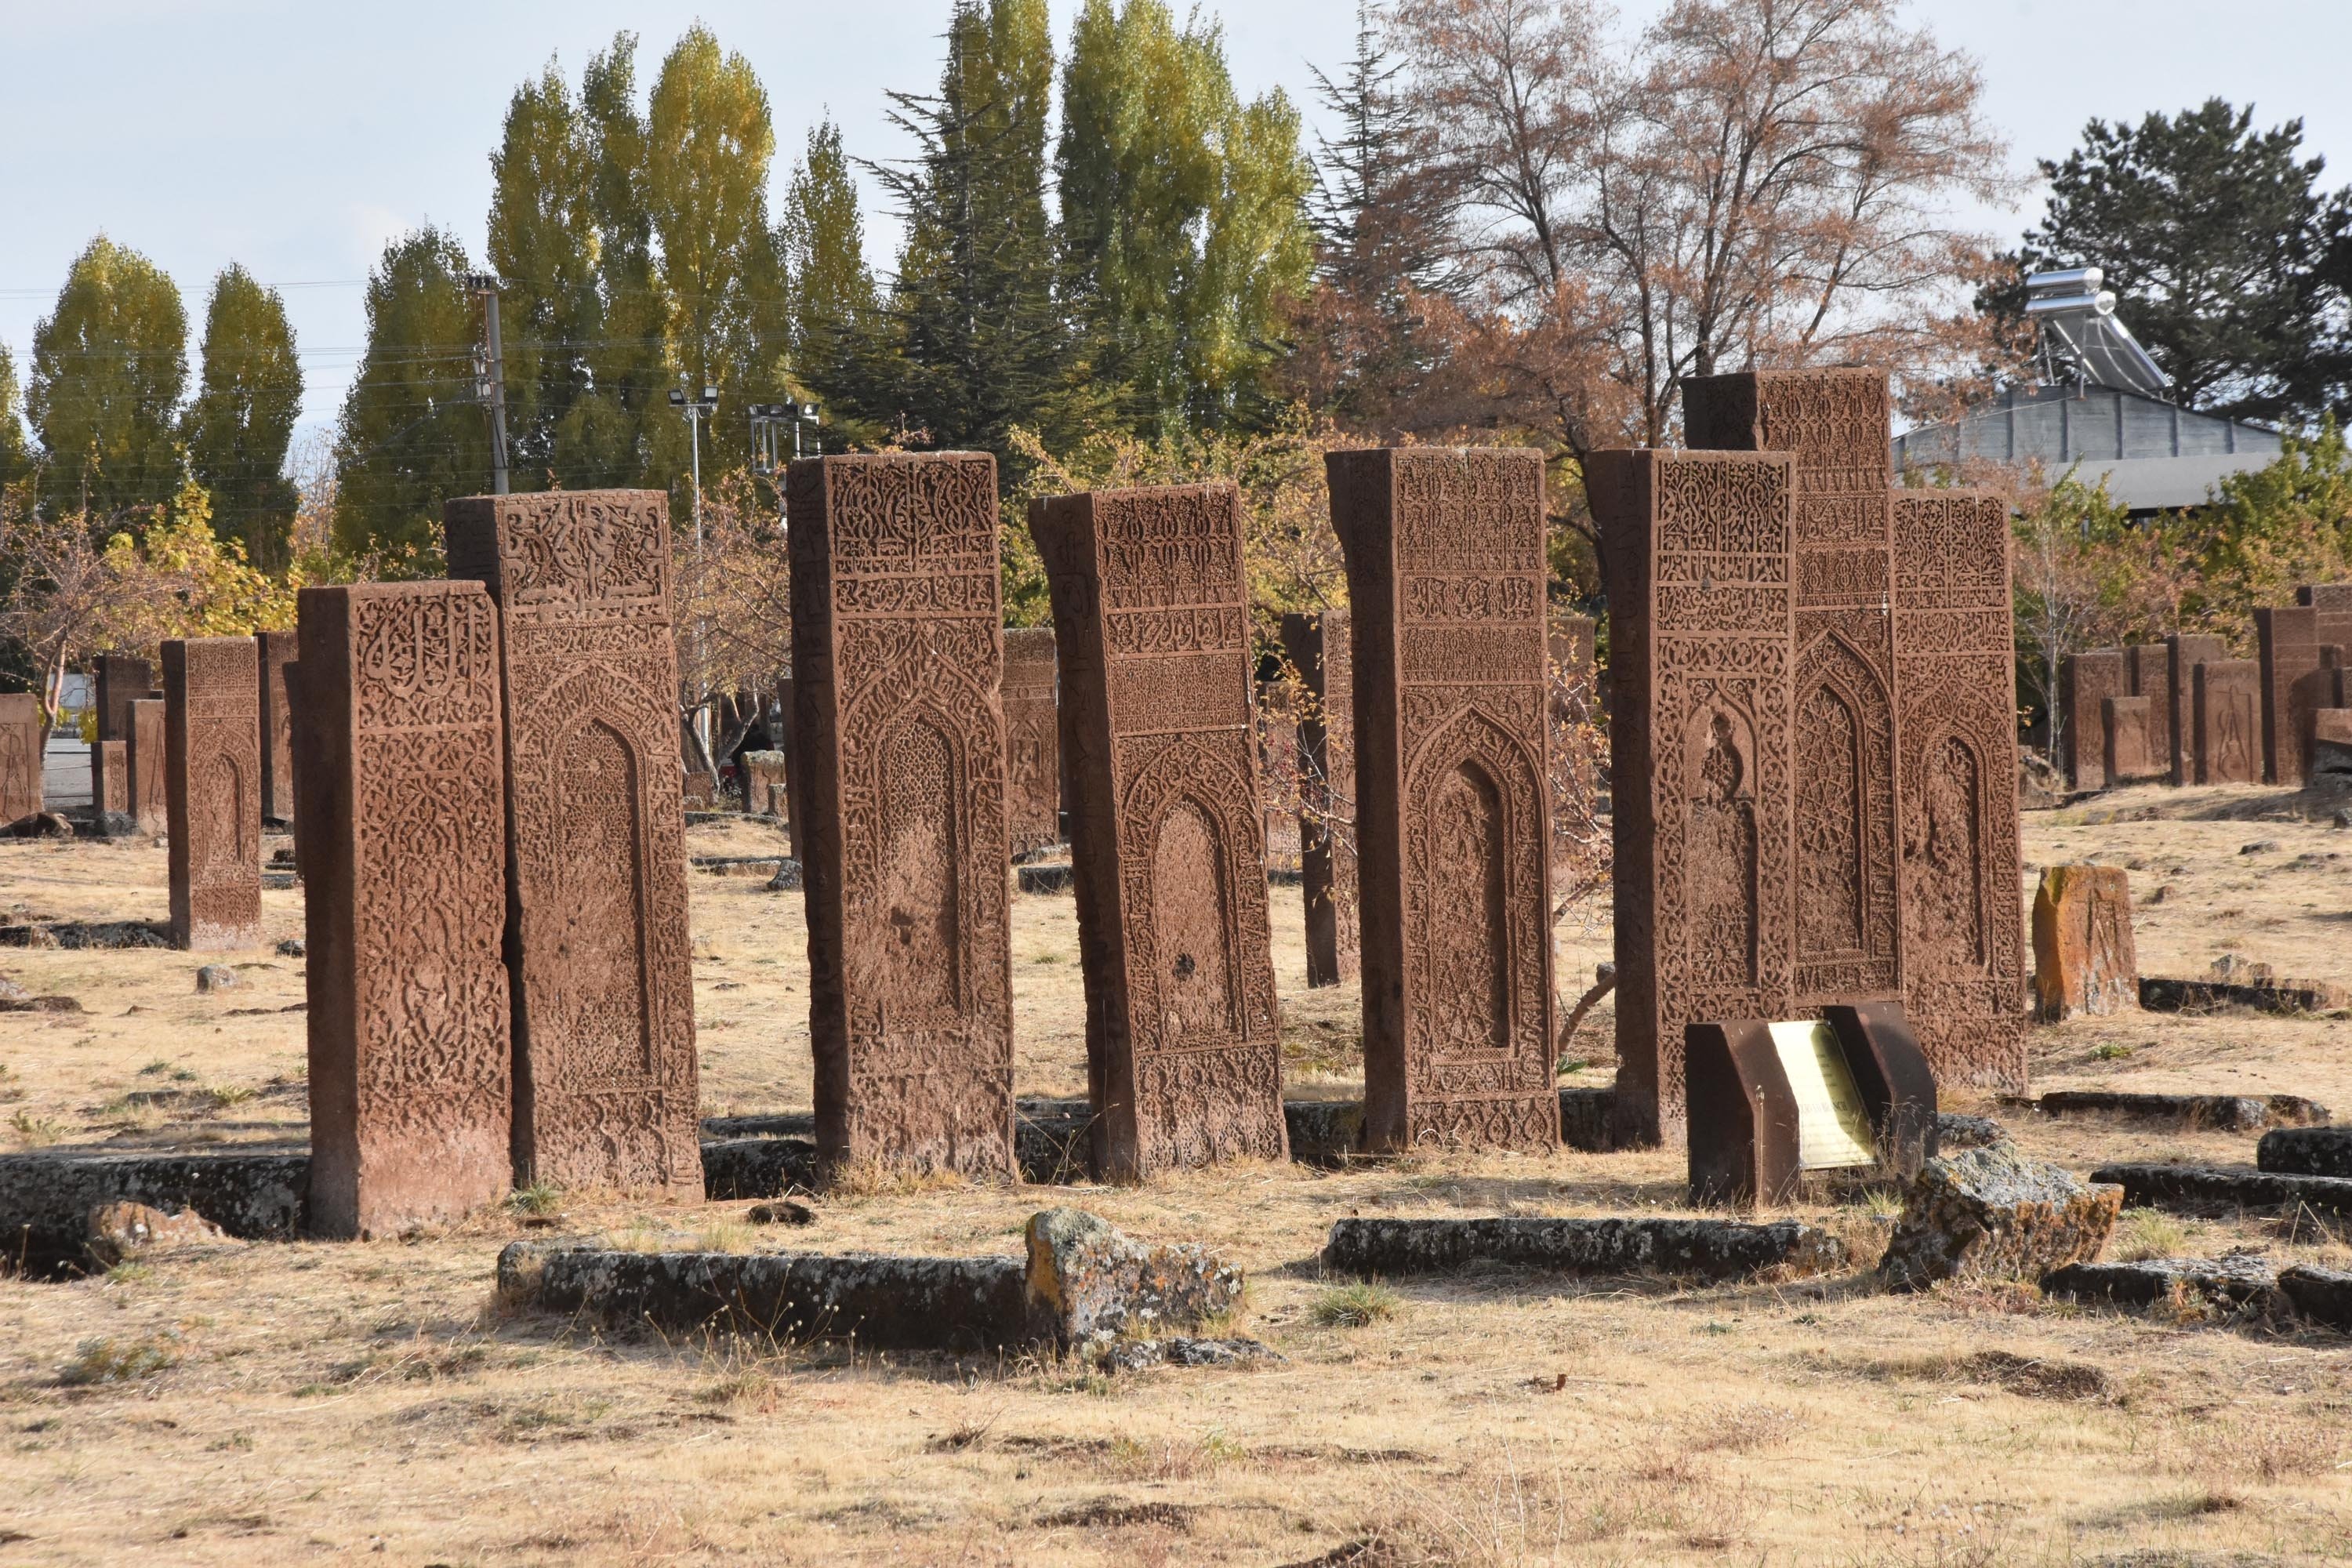 A view of the Ahlat Seljuk Meydan Cemetery, including tombs of children, in the Ahlat district of Bitlis, Turkey, Nov. 7, 2021. (DHA Photo)